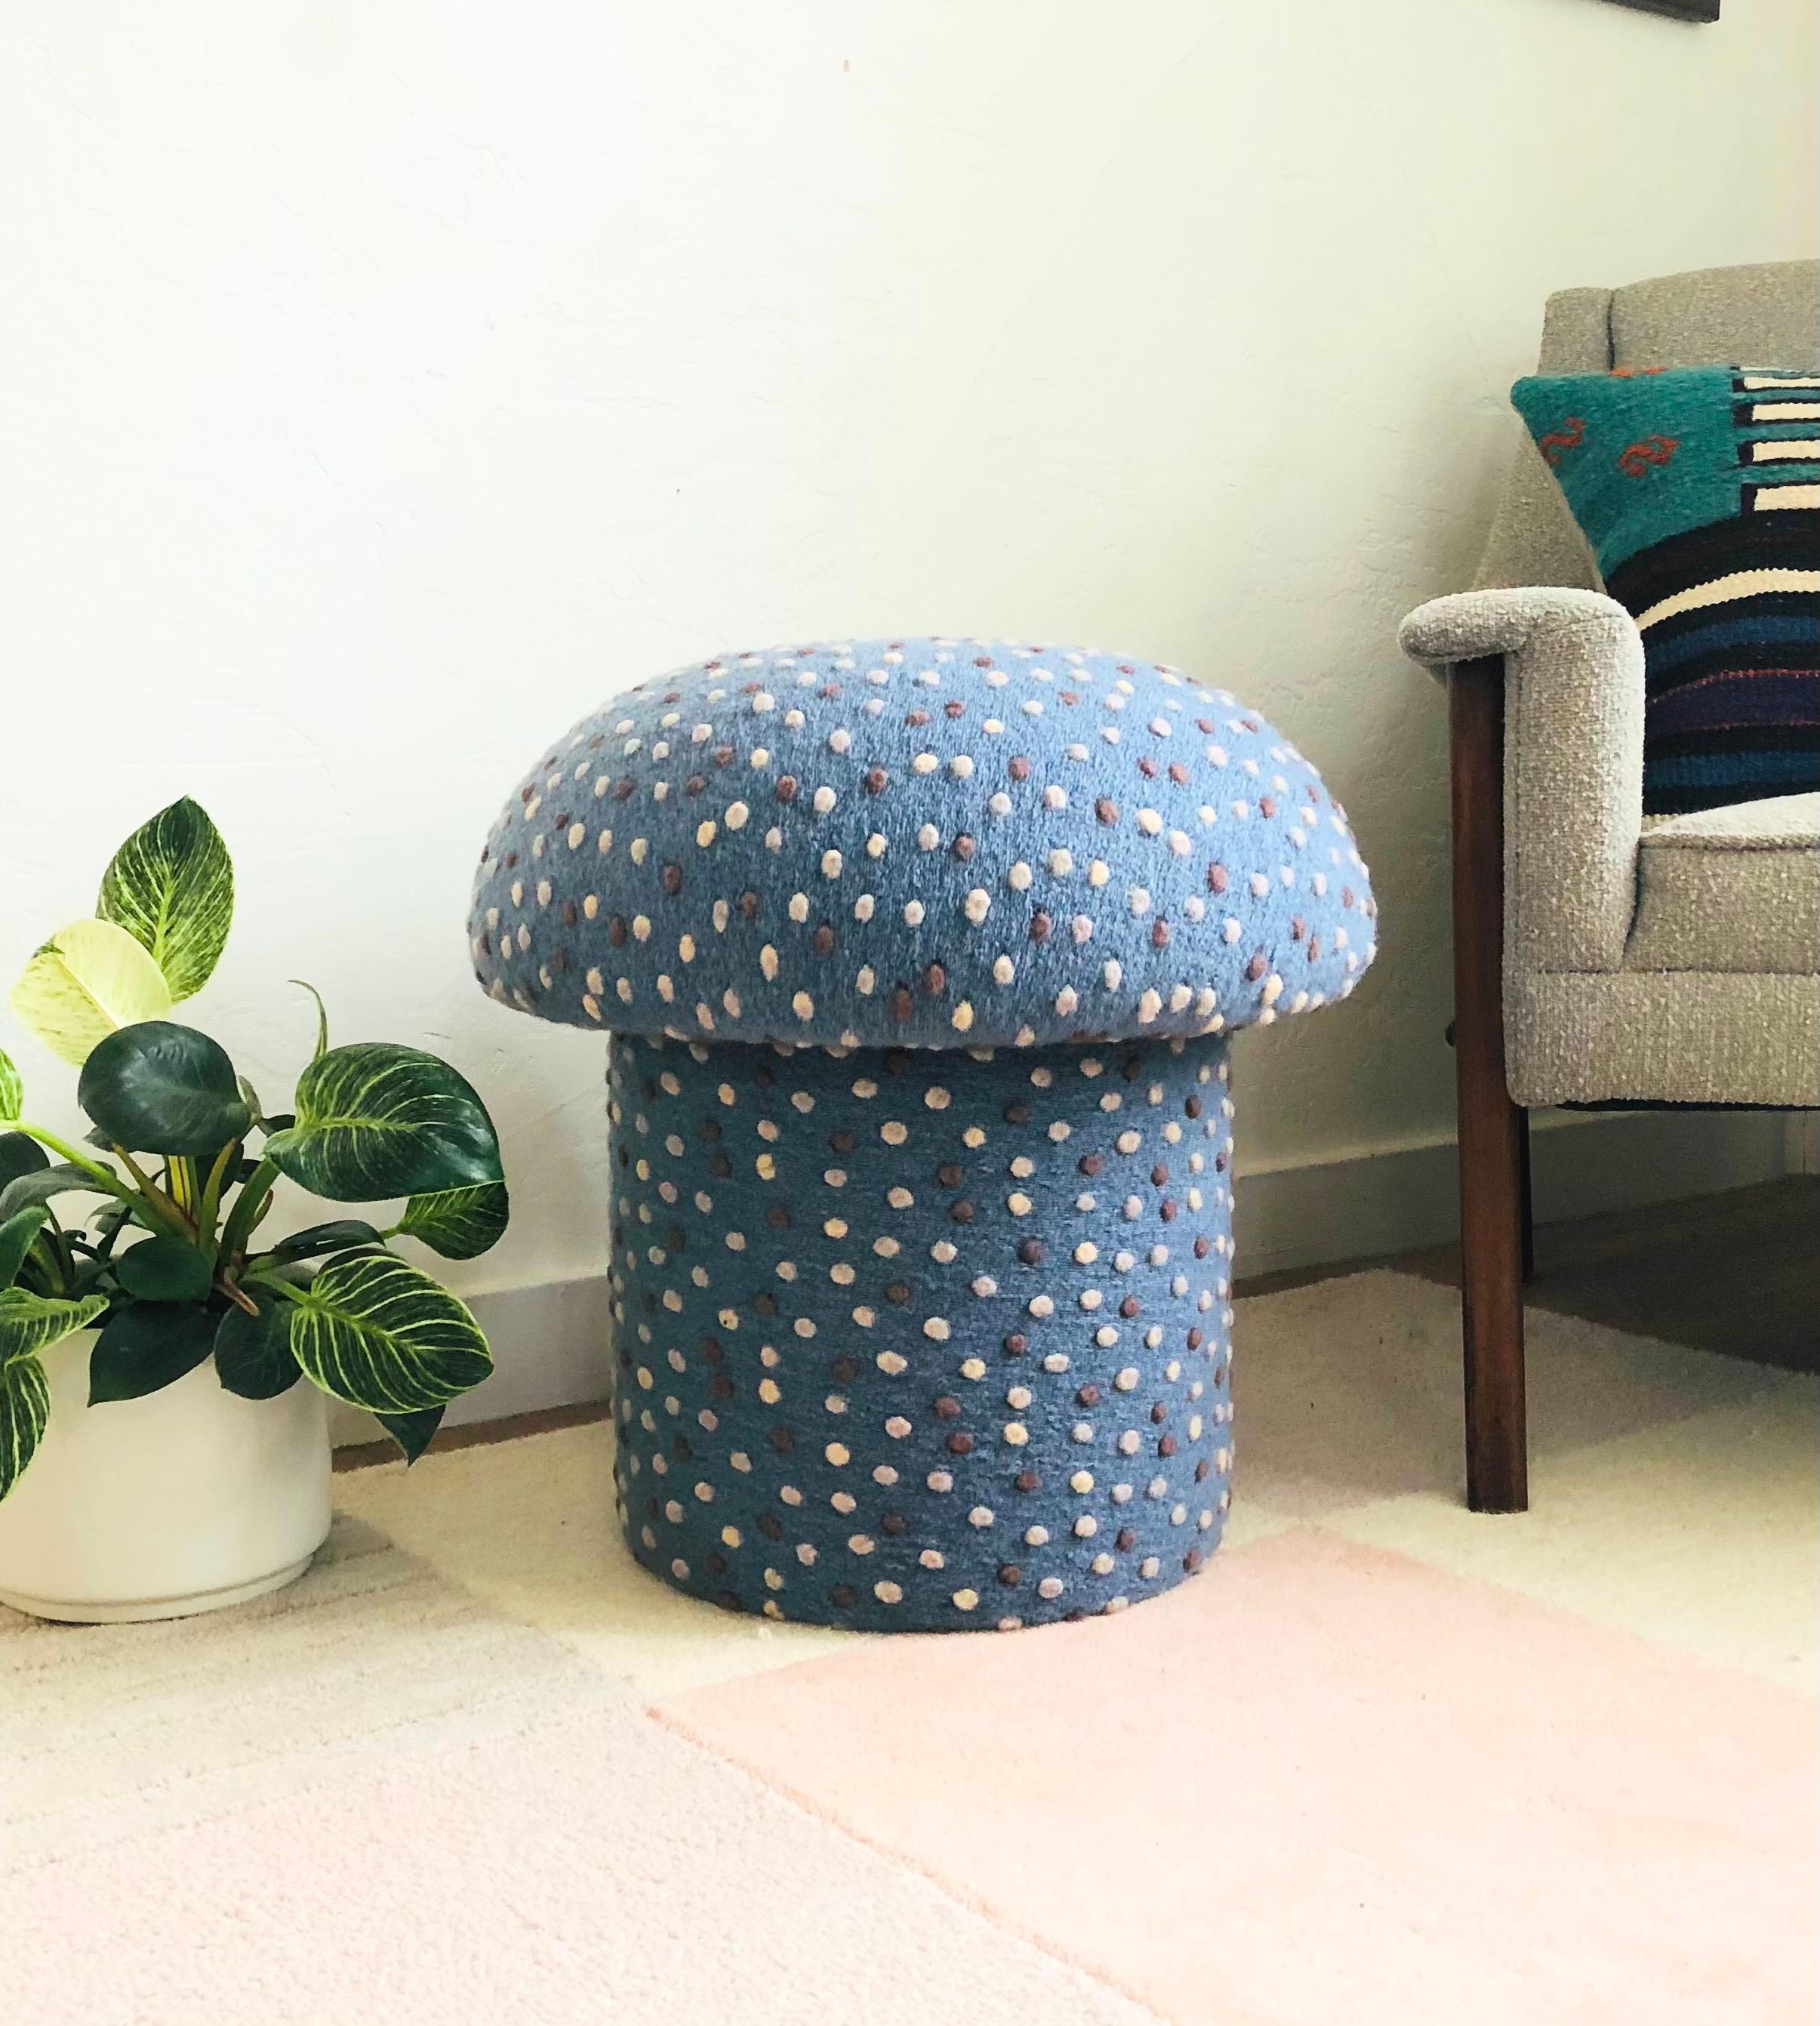 A handmade mushroom shaped ottoman, upholstered in a dotted wool blend fabric. Perfect for using as a footstool or extra occasional seating. A comfortable cushioned seat and sculptural accent piece. Fabric is a light denim blue color with small